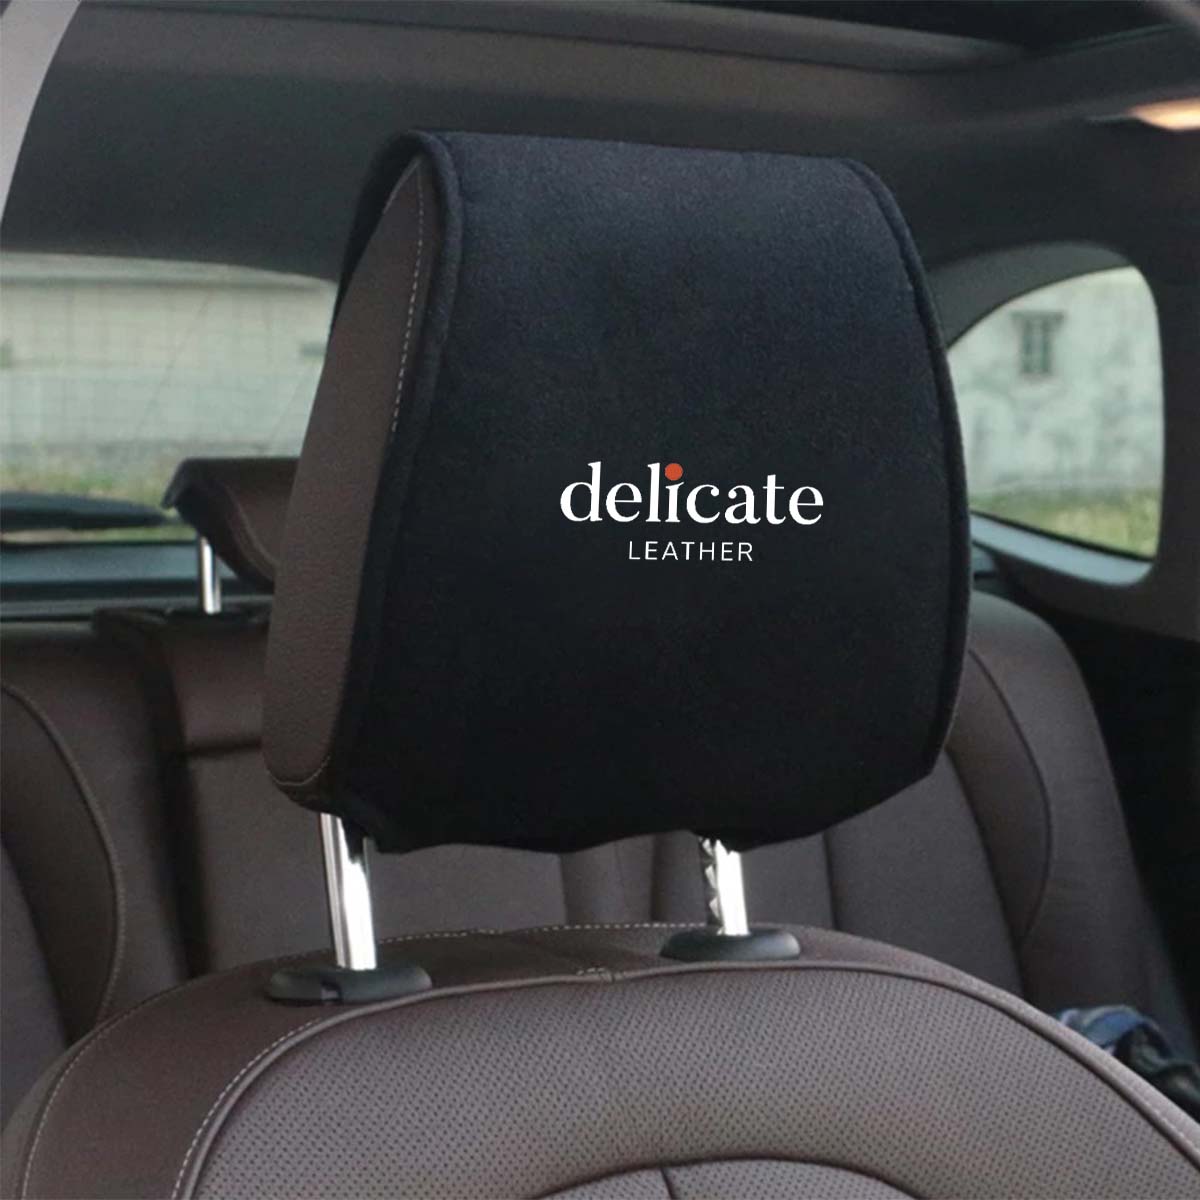 Volvo Car Seat Headrest Cover: Stylish Protection for Your Vehicle's Headrests